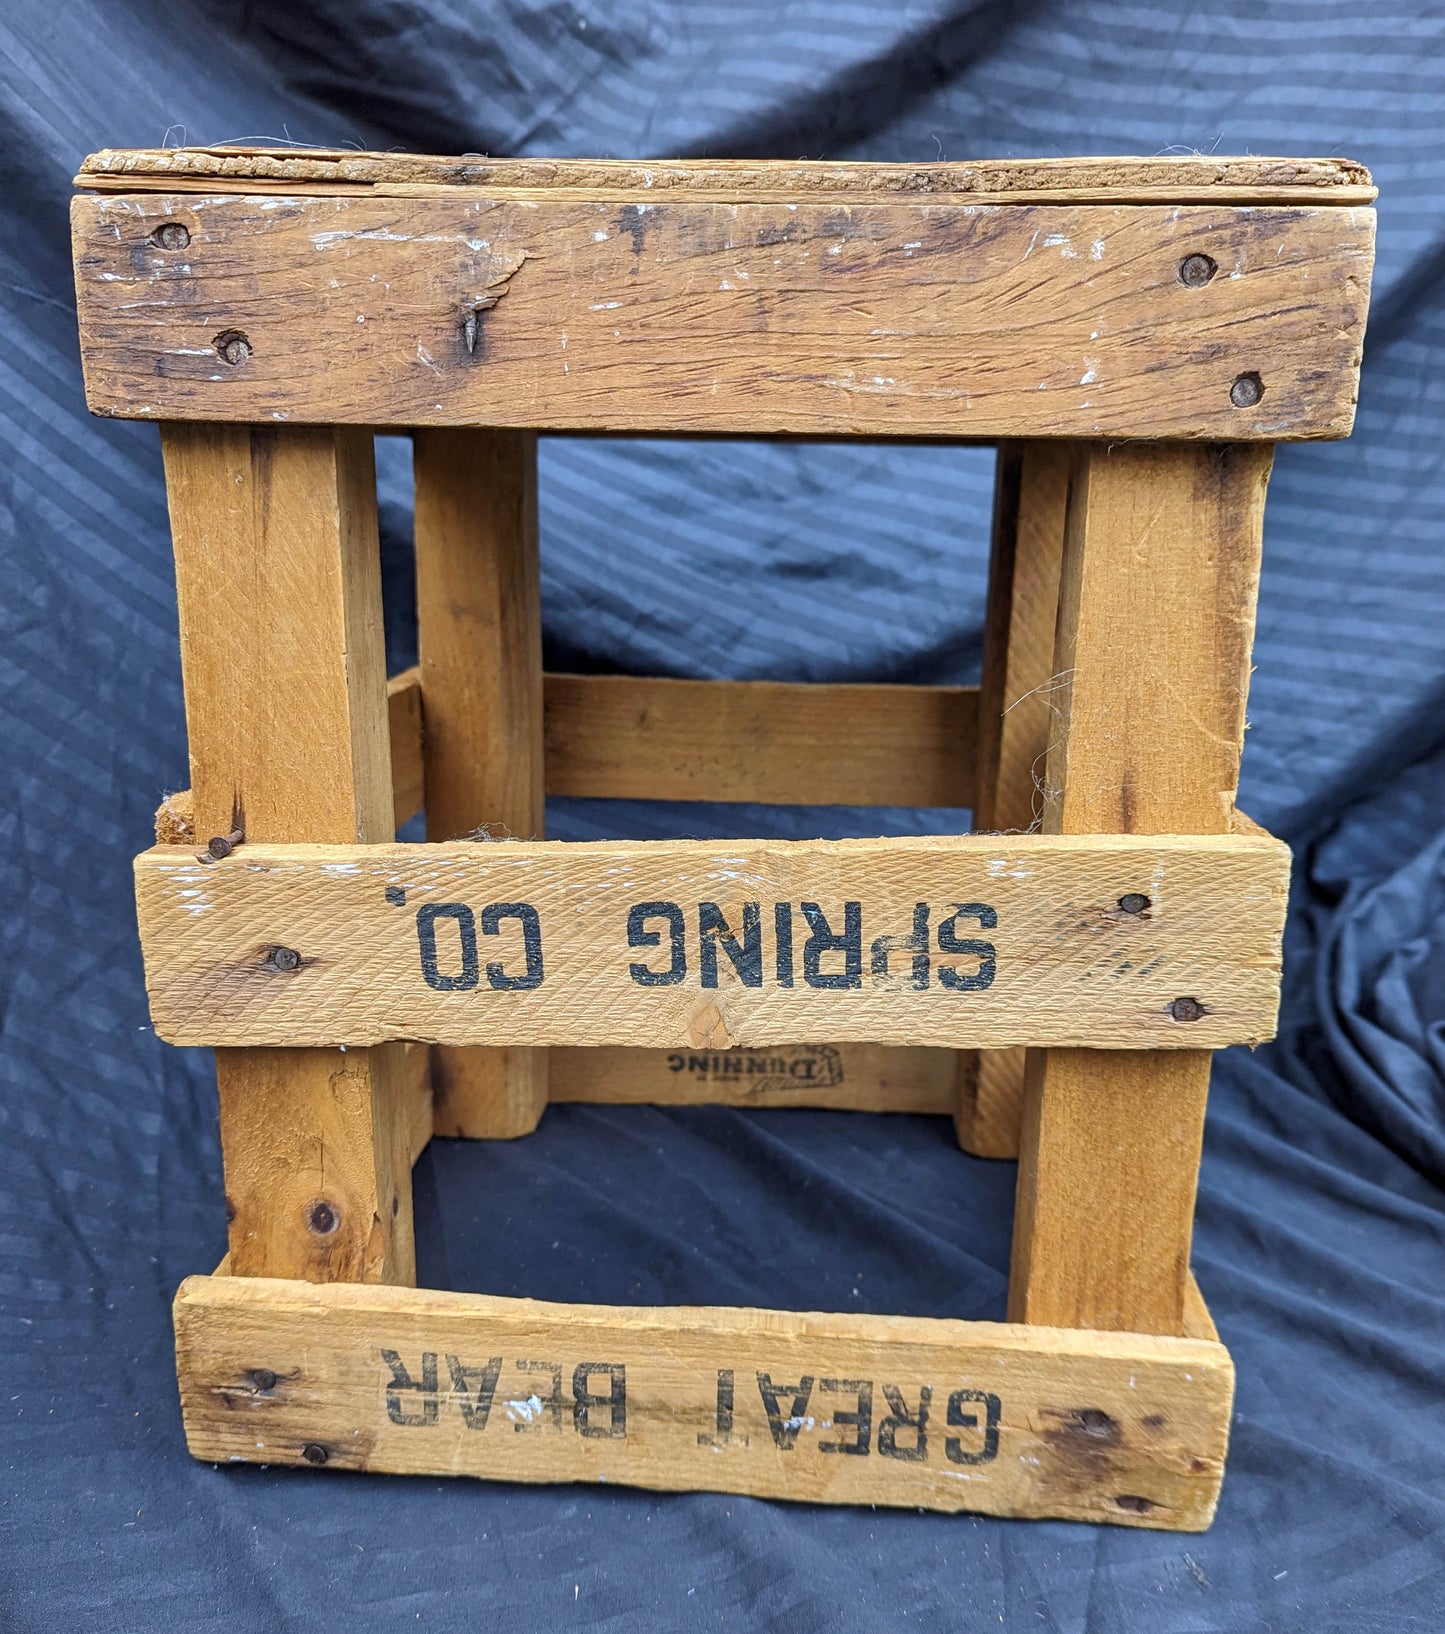 Vintage Antique Old "Great Bear Spring Co." Solid Pine Wood Wooden Crate Box Bin Table Foot Step Stool Plant Stand Side Accent Chair Seat Garden Bench